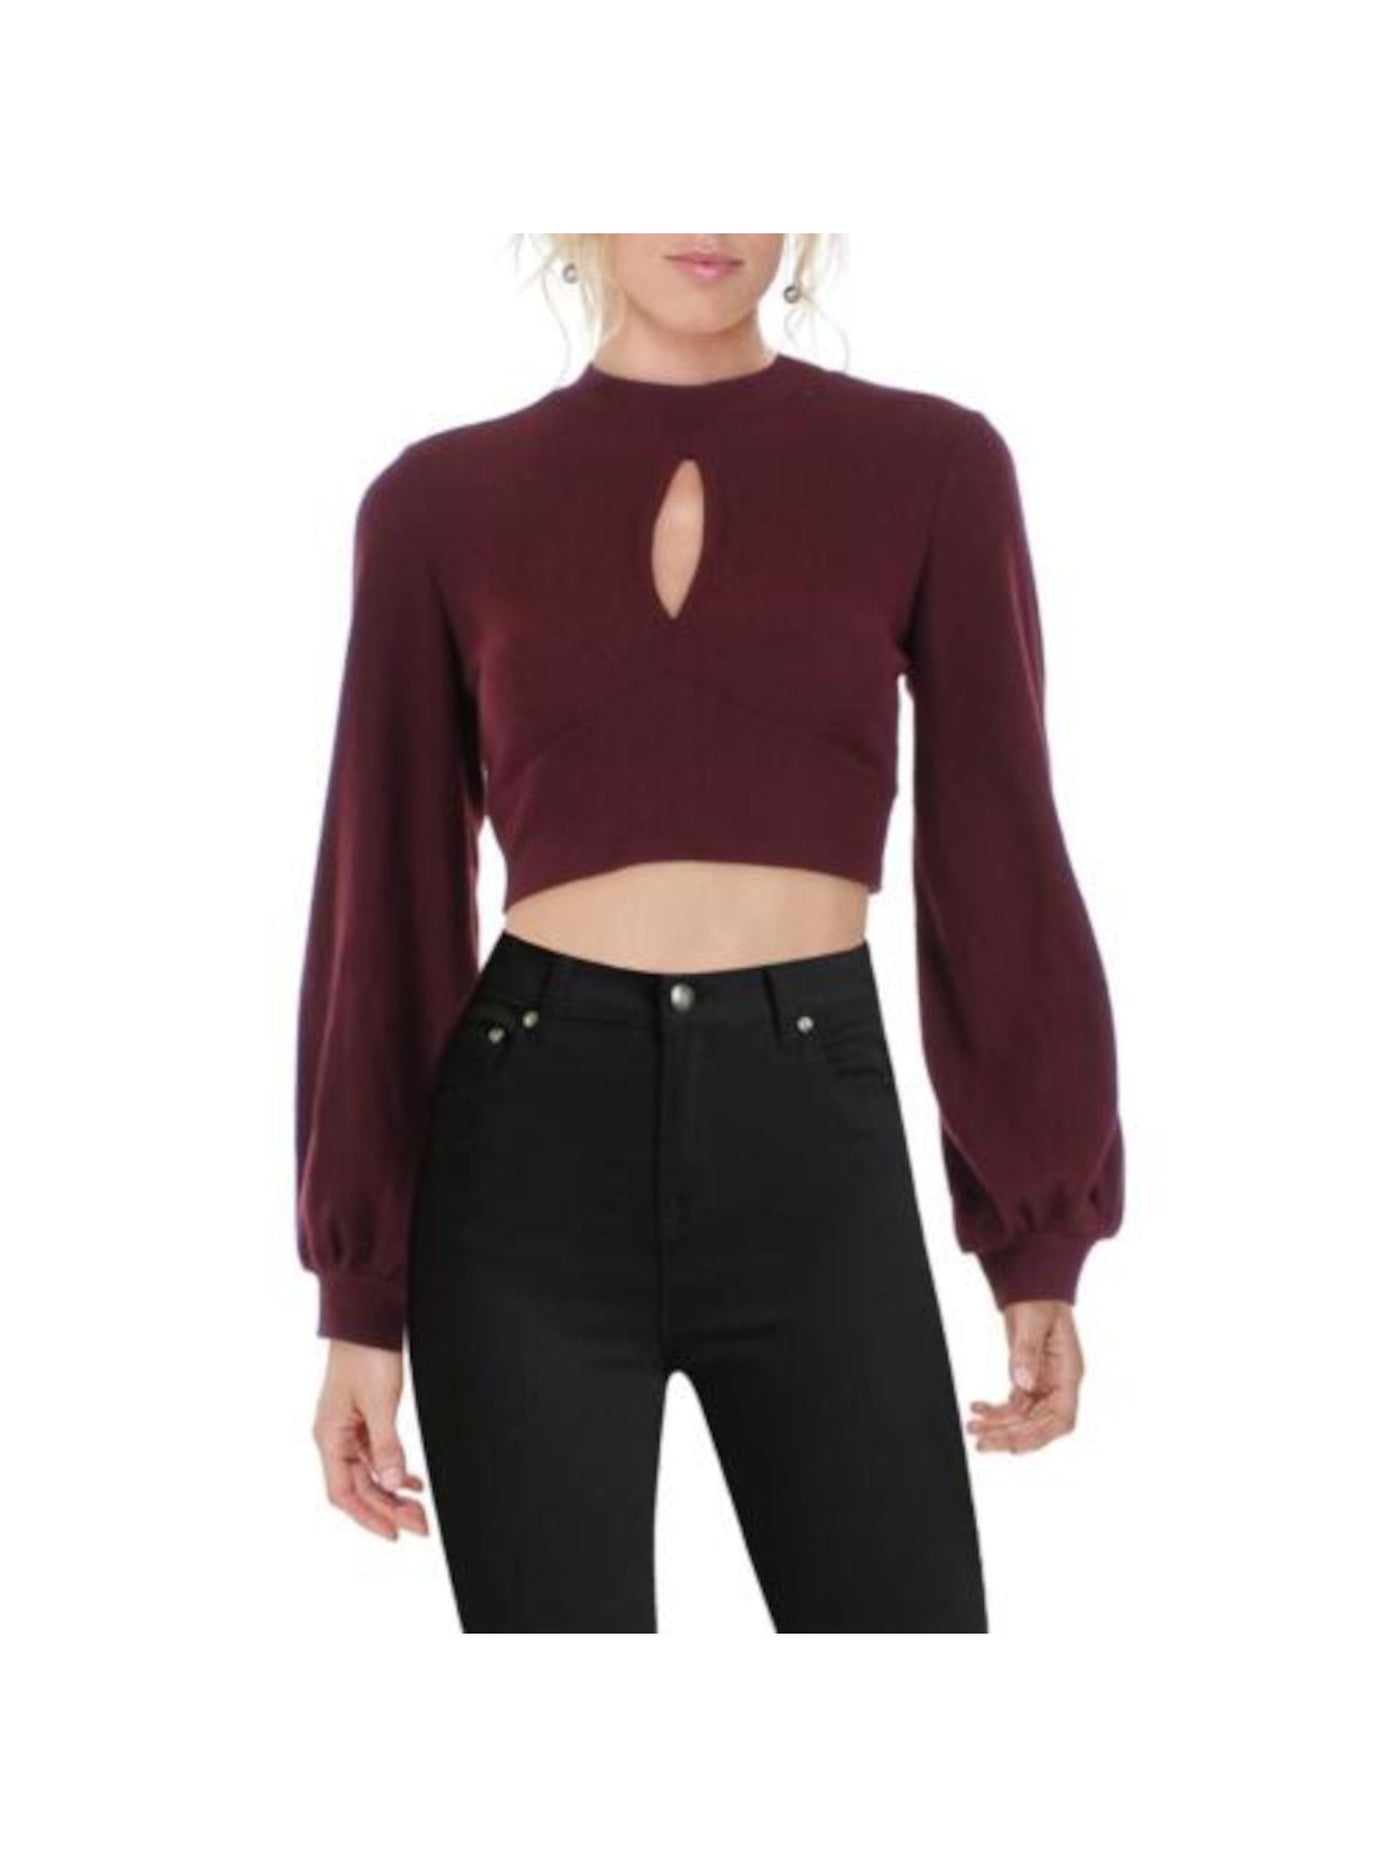 ALMOST FAMOUS Womens Purple Ribbed Cut Out Button Top Open Back Tie Hem Balloon Sleeve Mock Neck Crop Top Sweater Juniors L